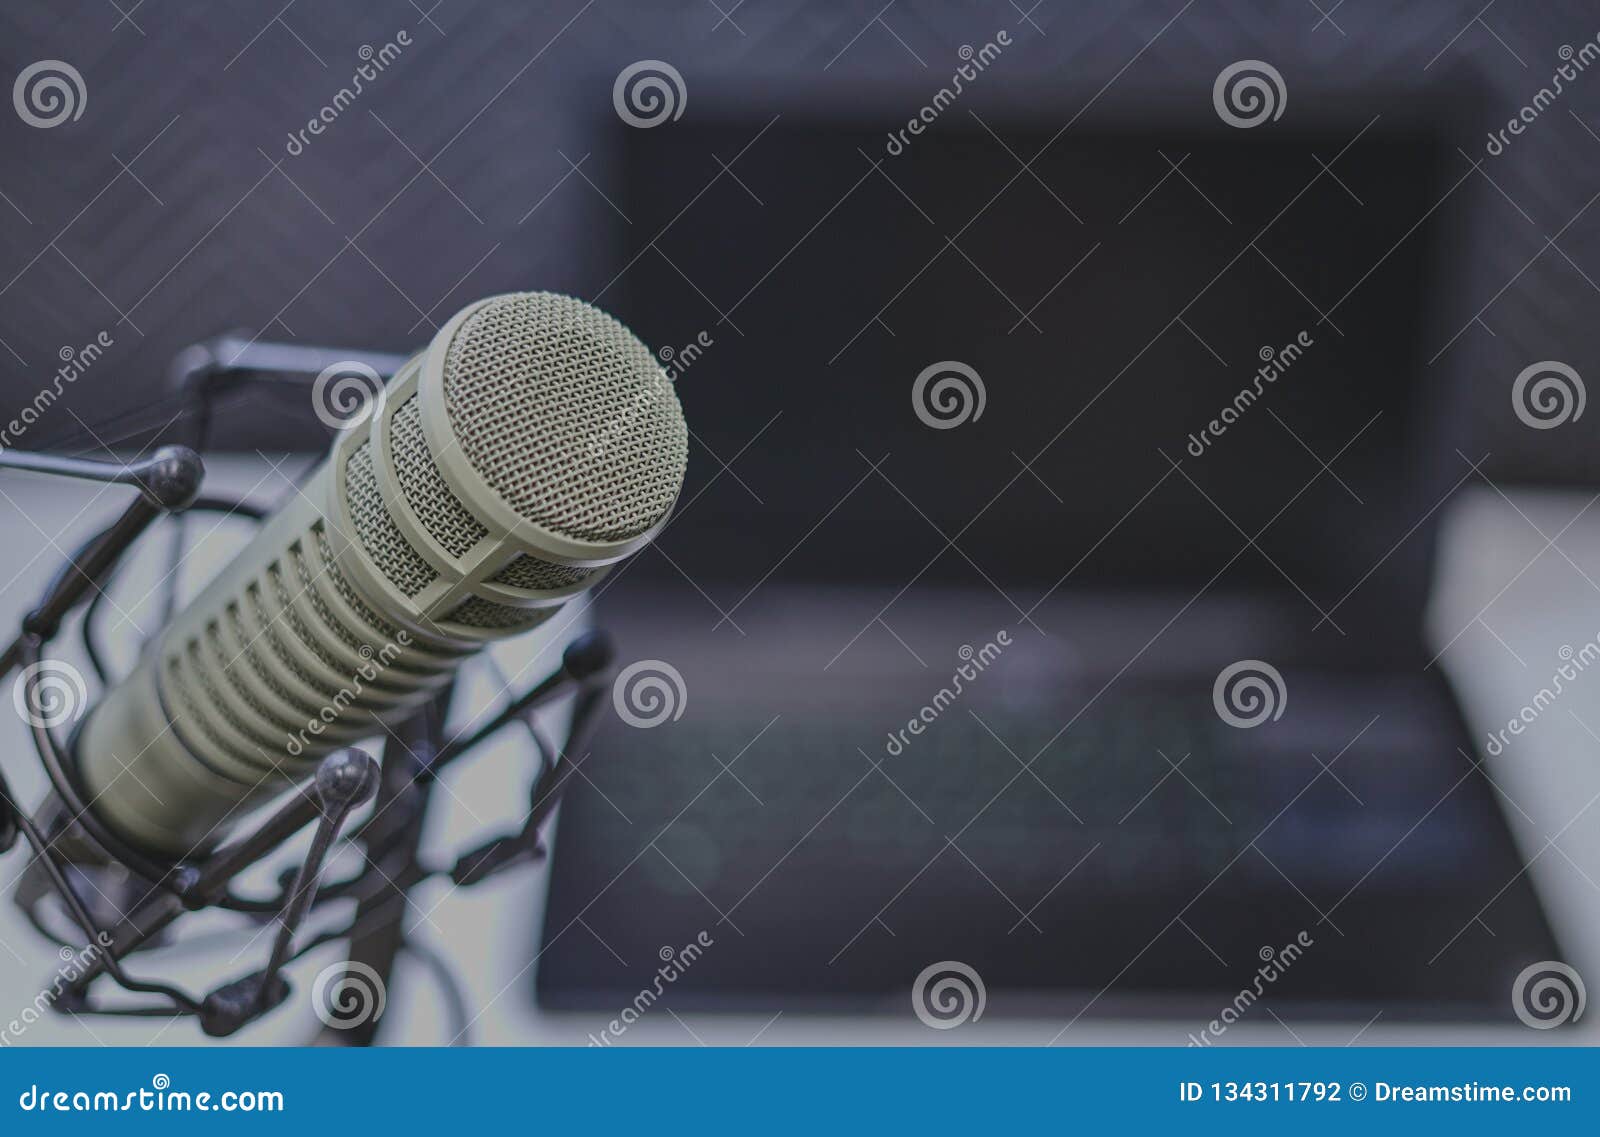 podcasting setup with microphone in focus